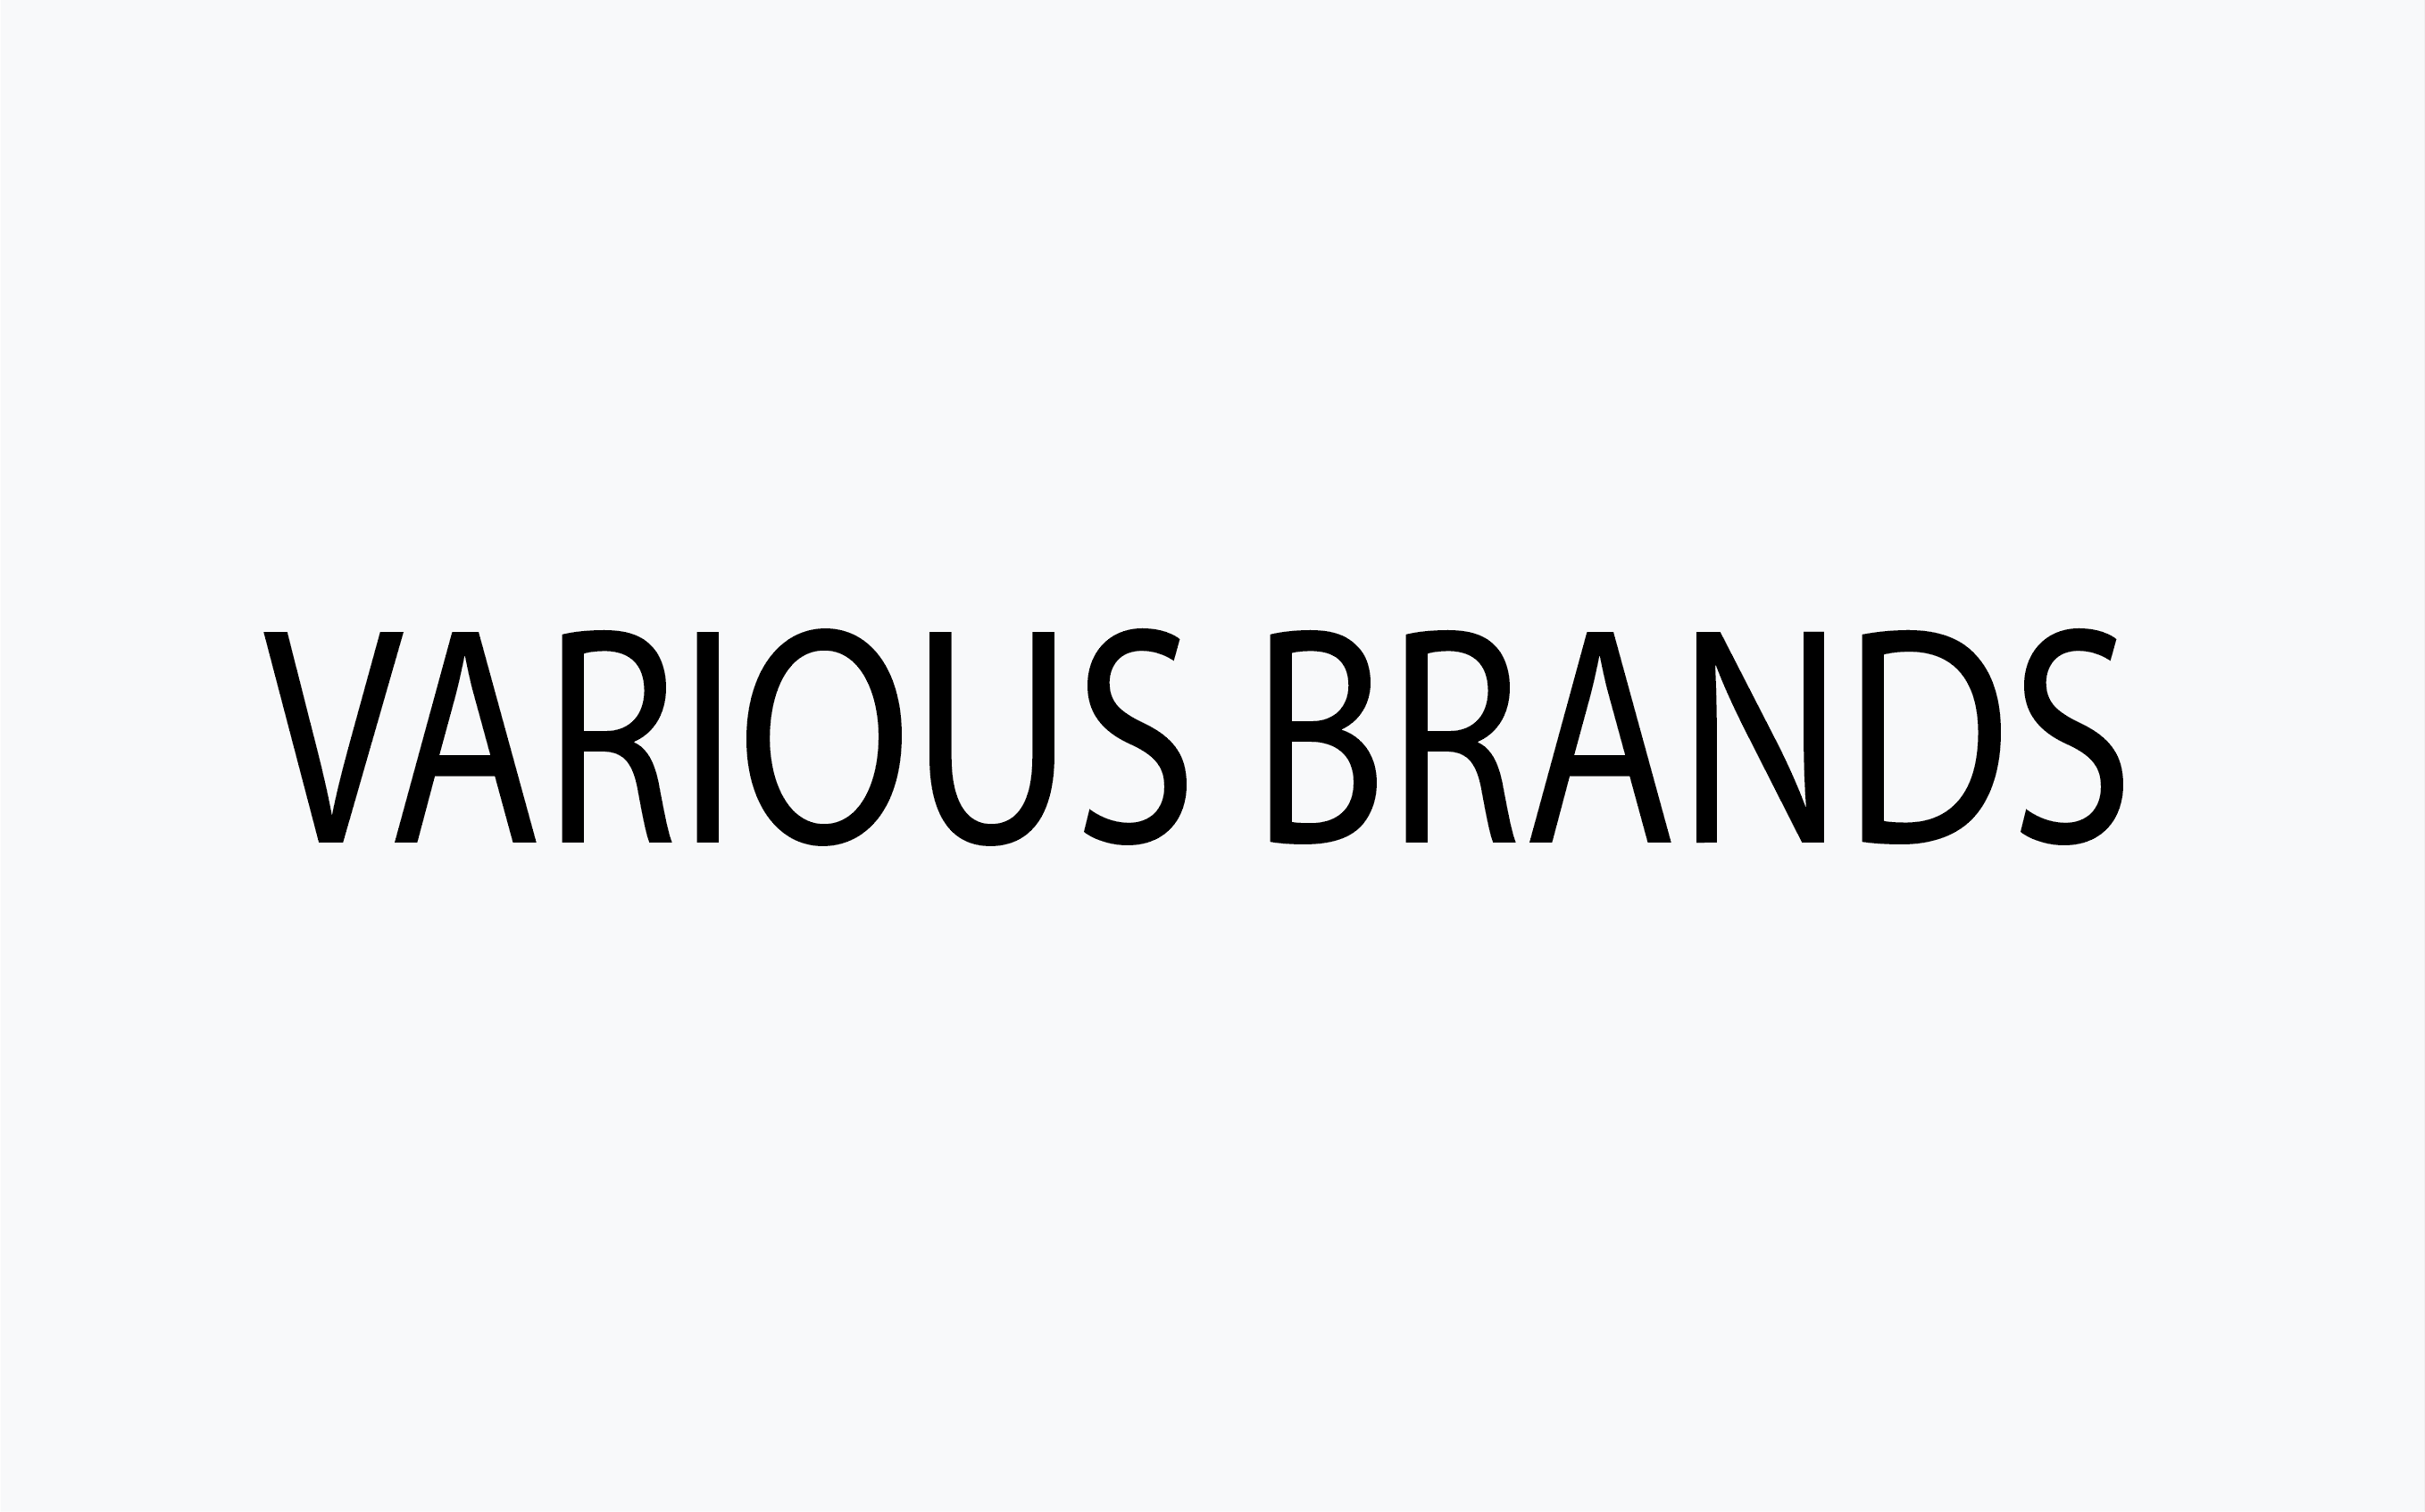 Other Brands category